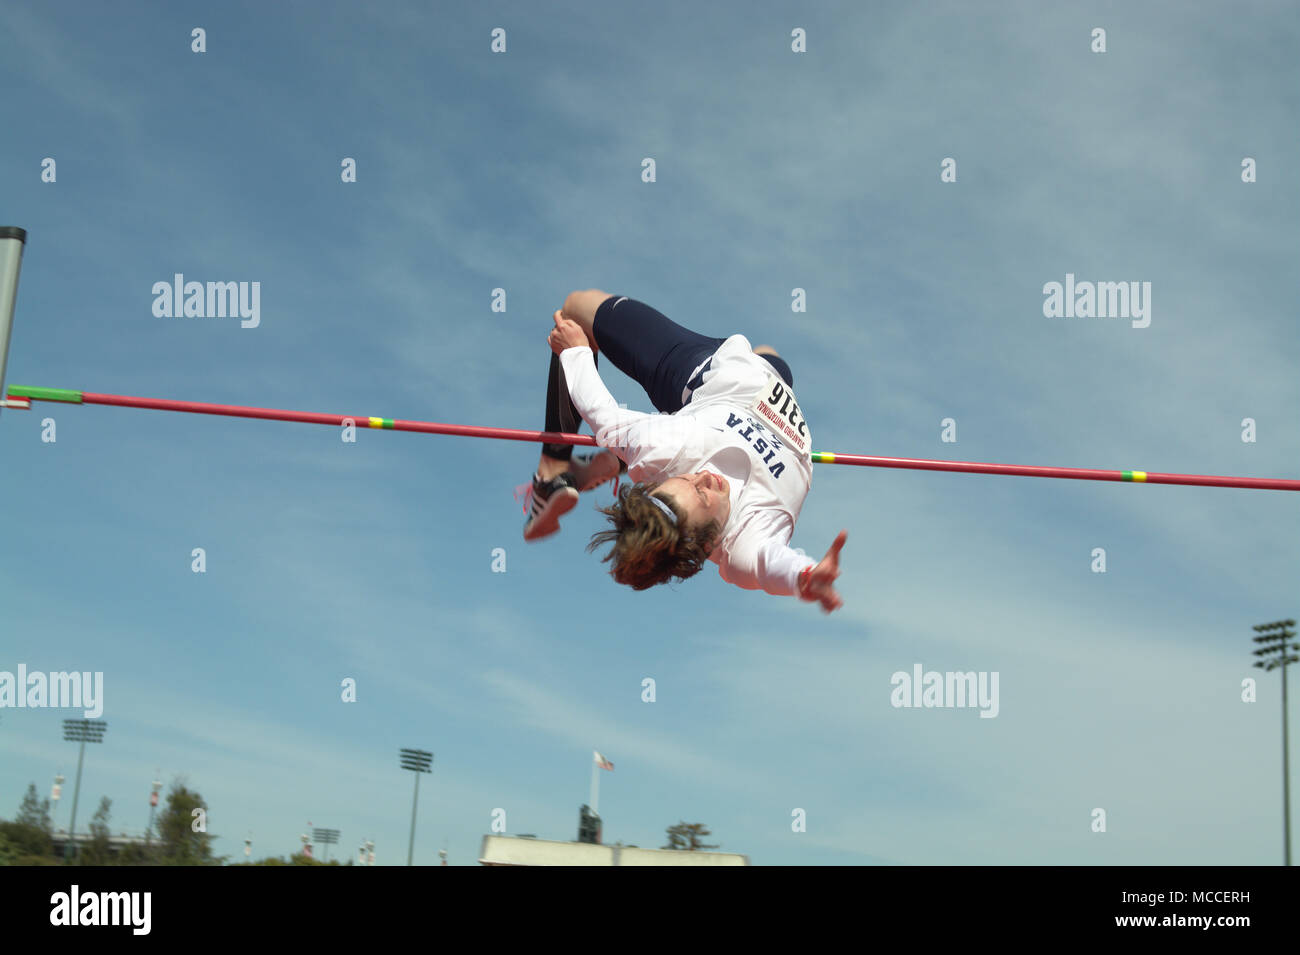 Jake Grimsman clears 2.21m (7'3') to win the high school boys high jump competition during the 2018 Stanford Invitational track meet. Stock Photo